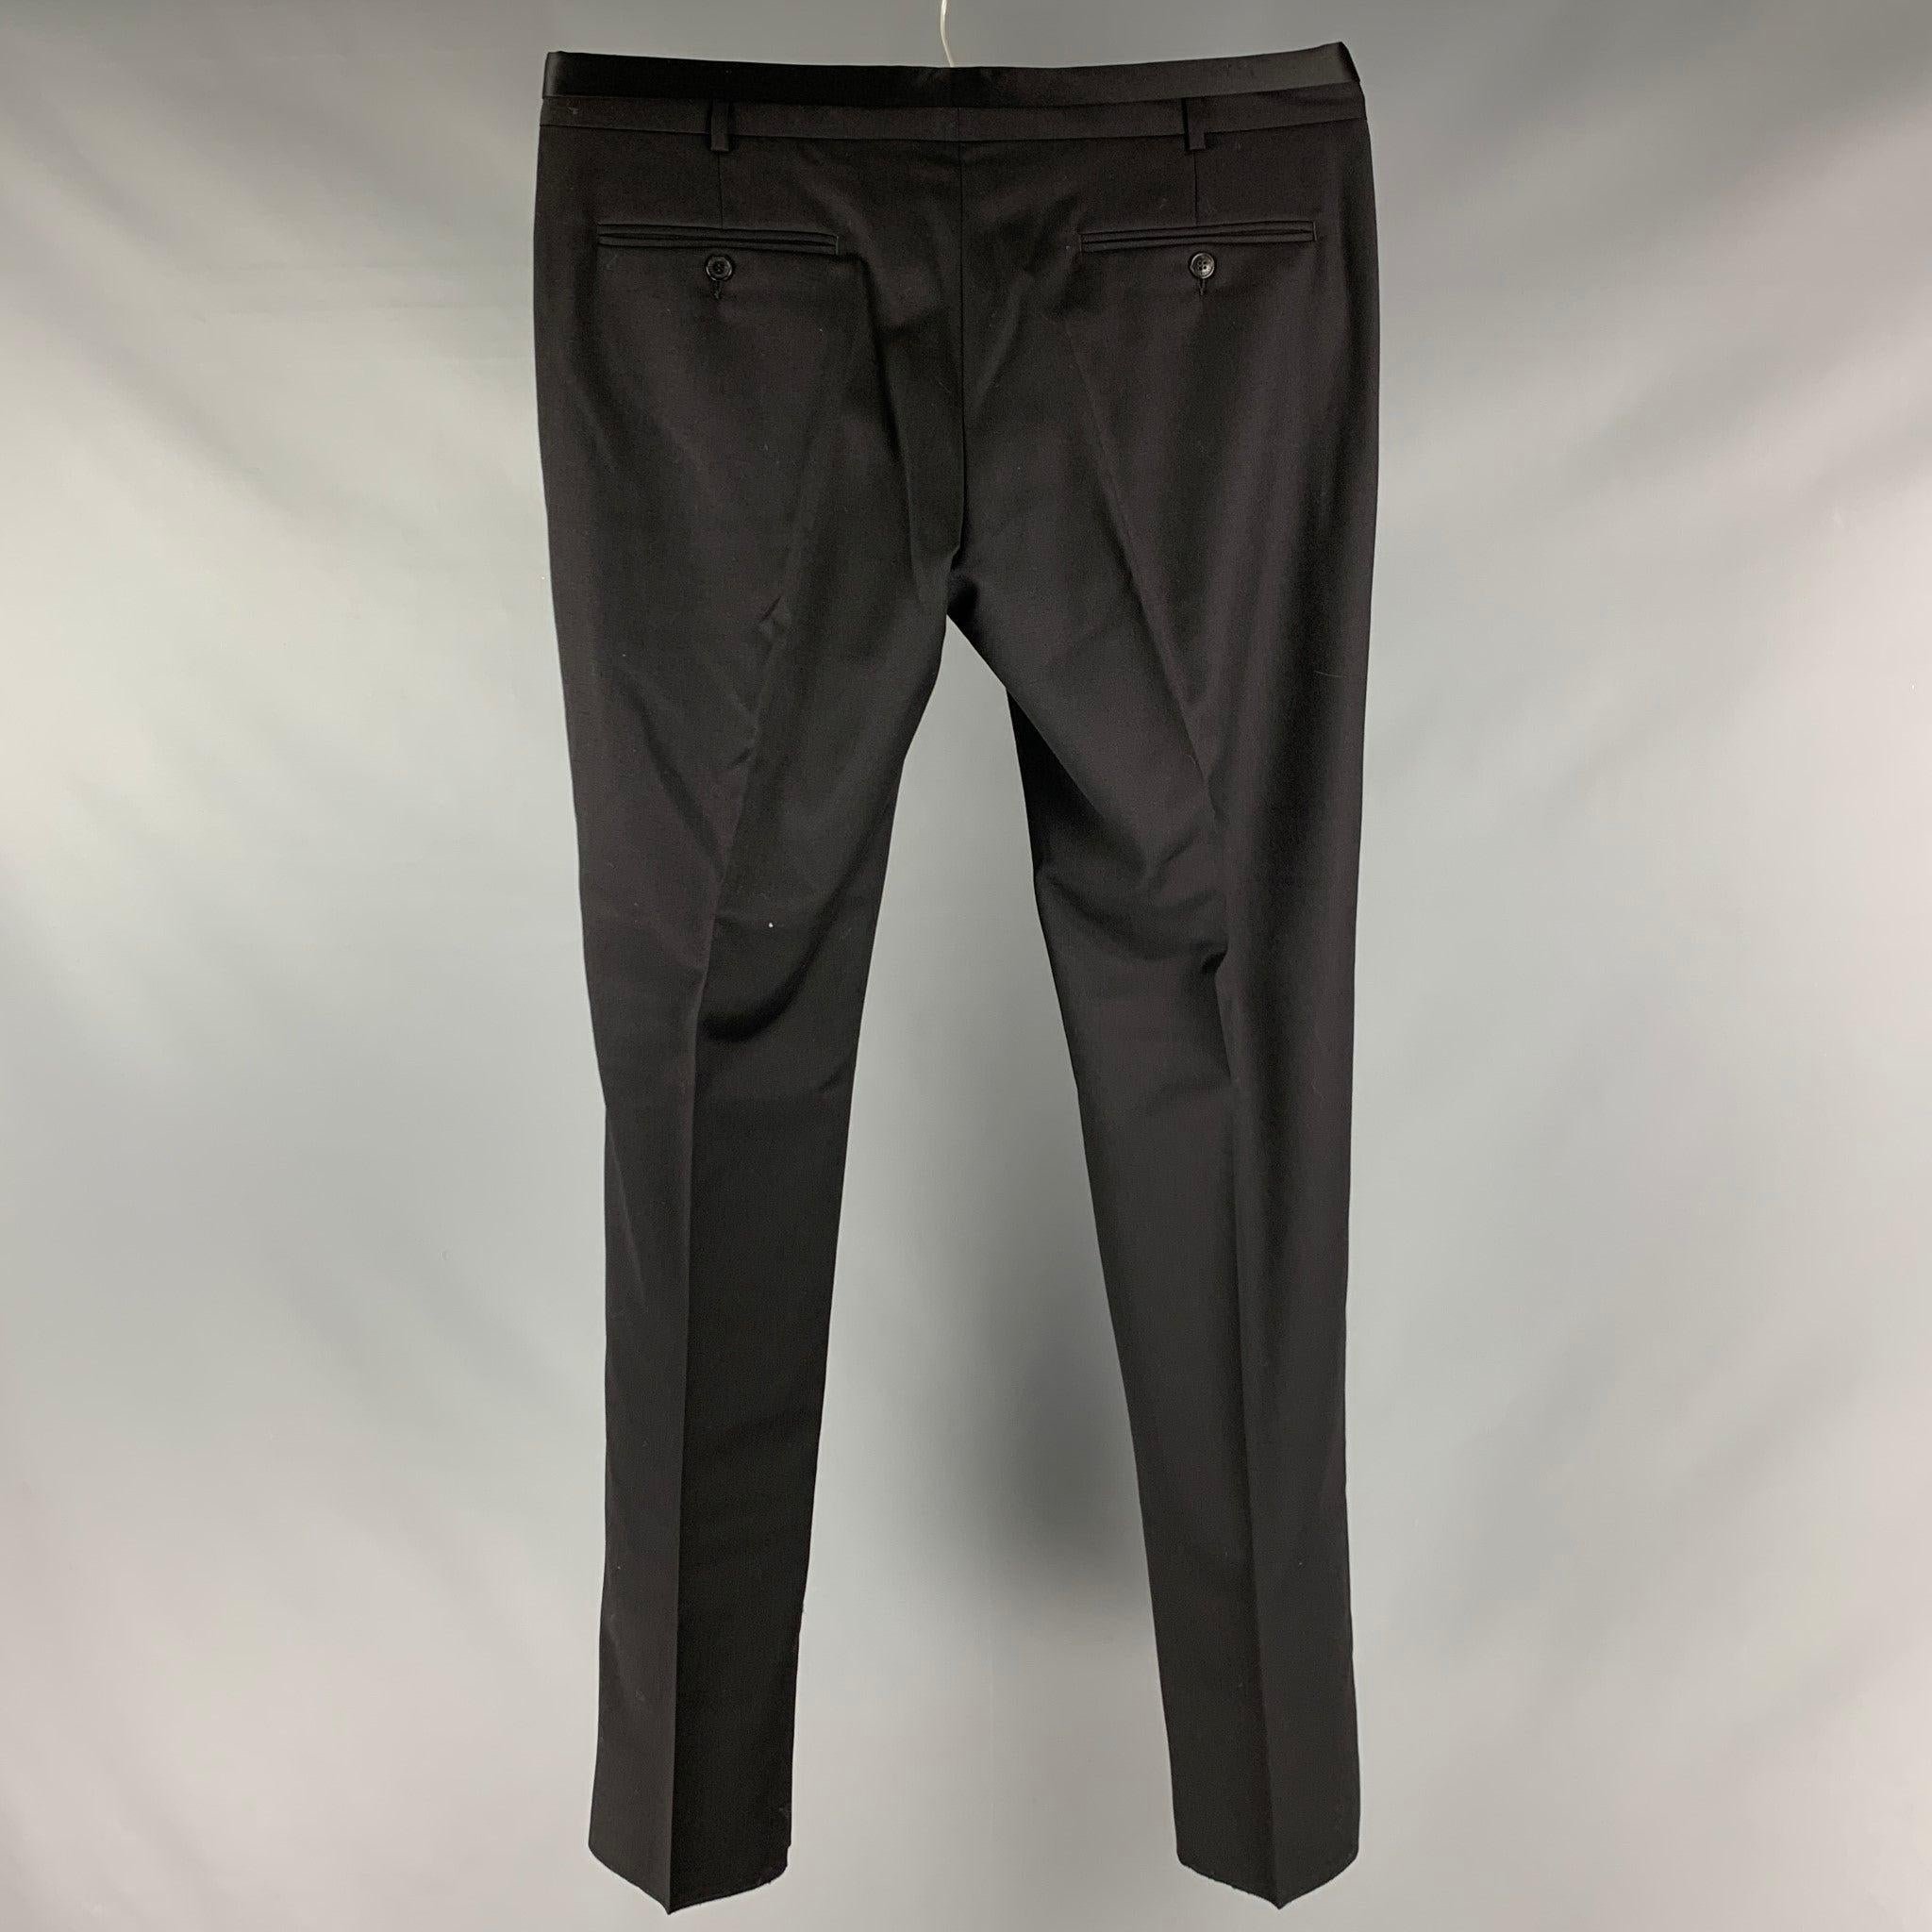 VIKTOR & ROLF dress pants comes in a black wool woven material featuring a
 tuxedo style, front tab, and a zip fly closure. Made in Italy.New with Tags. 

Marked:  54 

Measurements: 
 Waist: 38 inches Rise: 8 inches Inseam: 38 inches 

 
 
